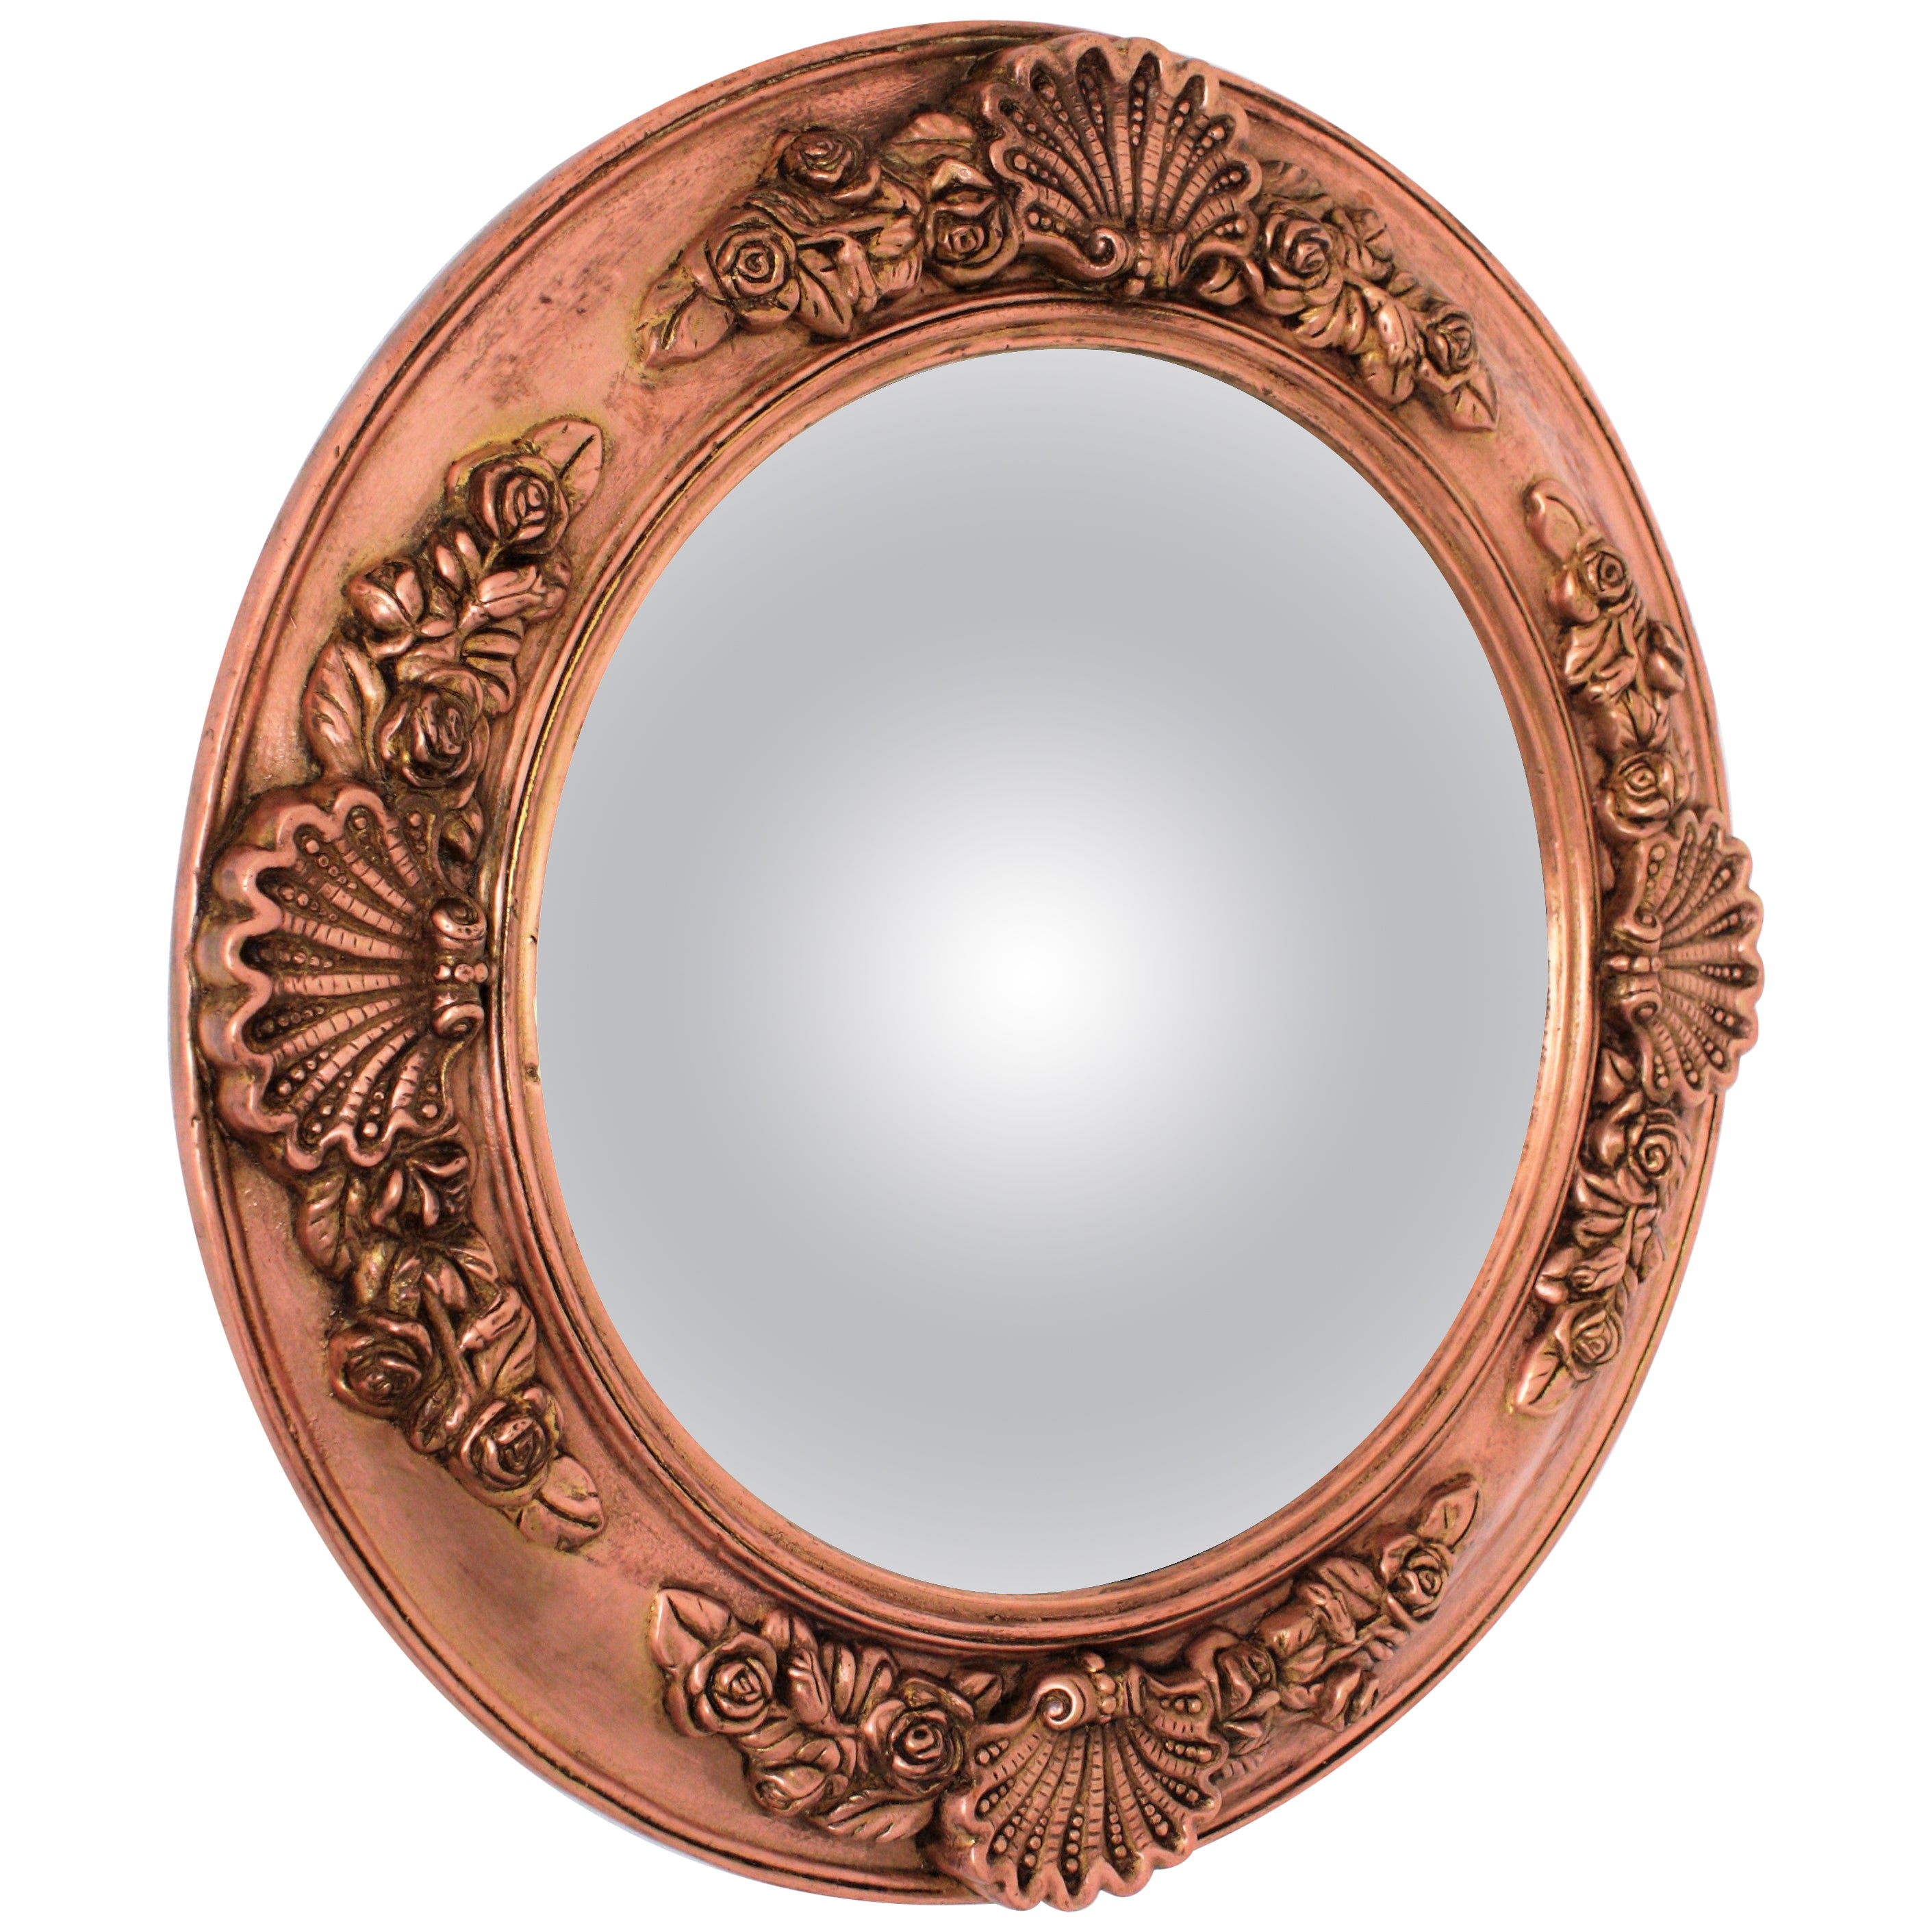 English Round Convex Mirror in Copper, Shell and Floral Motifs